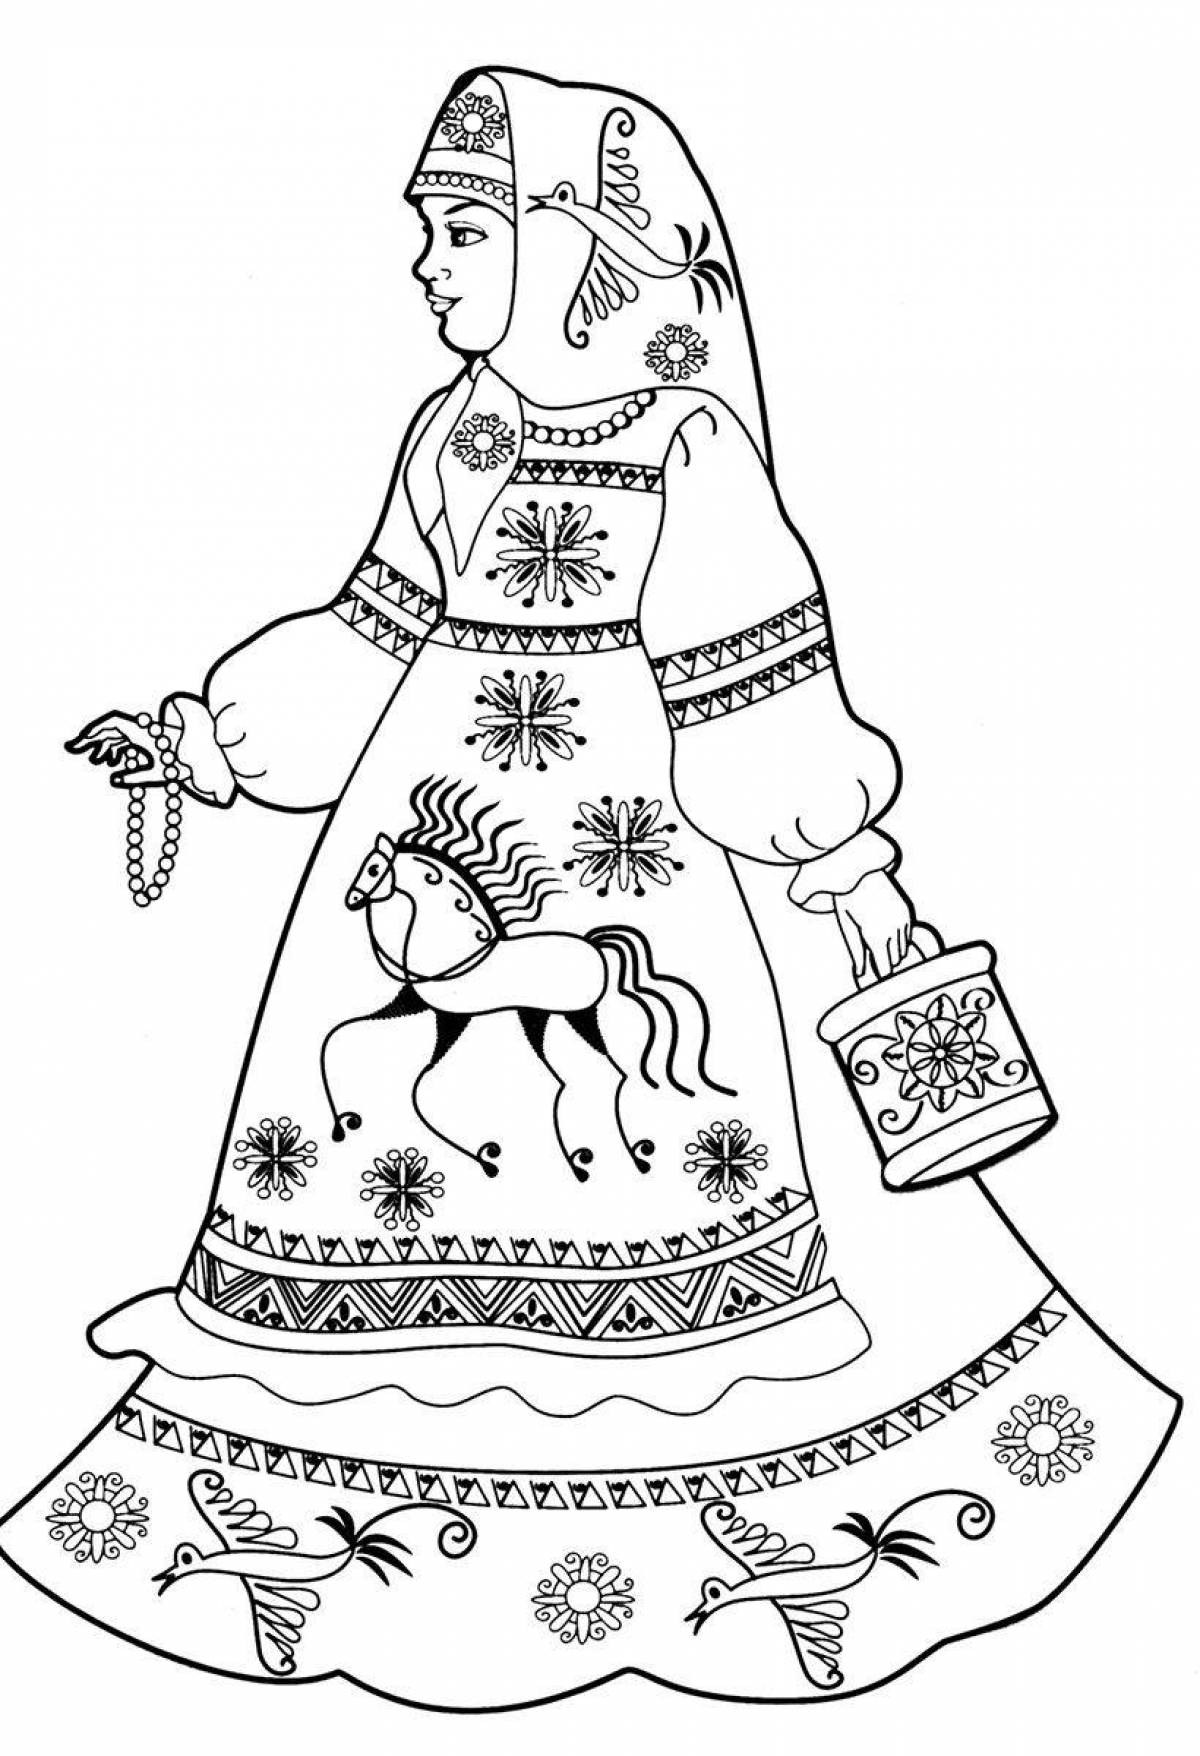 Coloring page timeless Russian folk costume